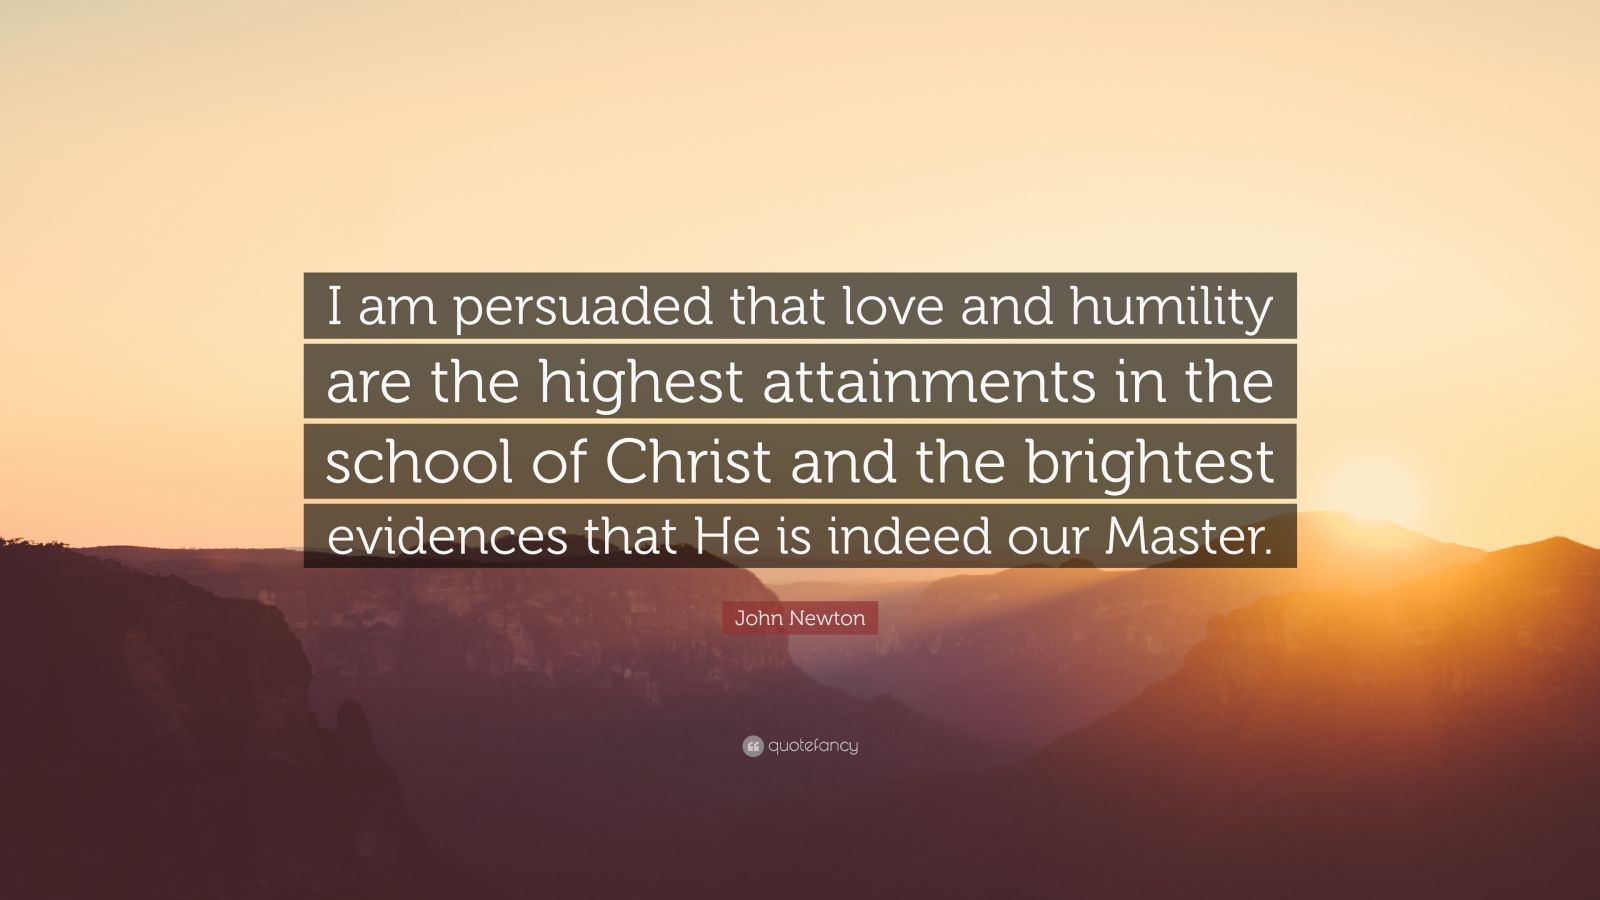 John Newton Quote: “I am persuaded that love and humility are the